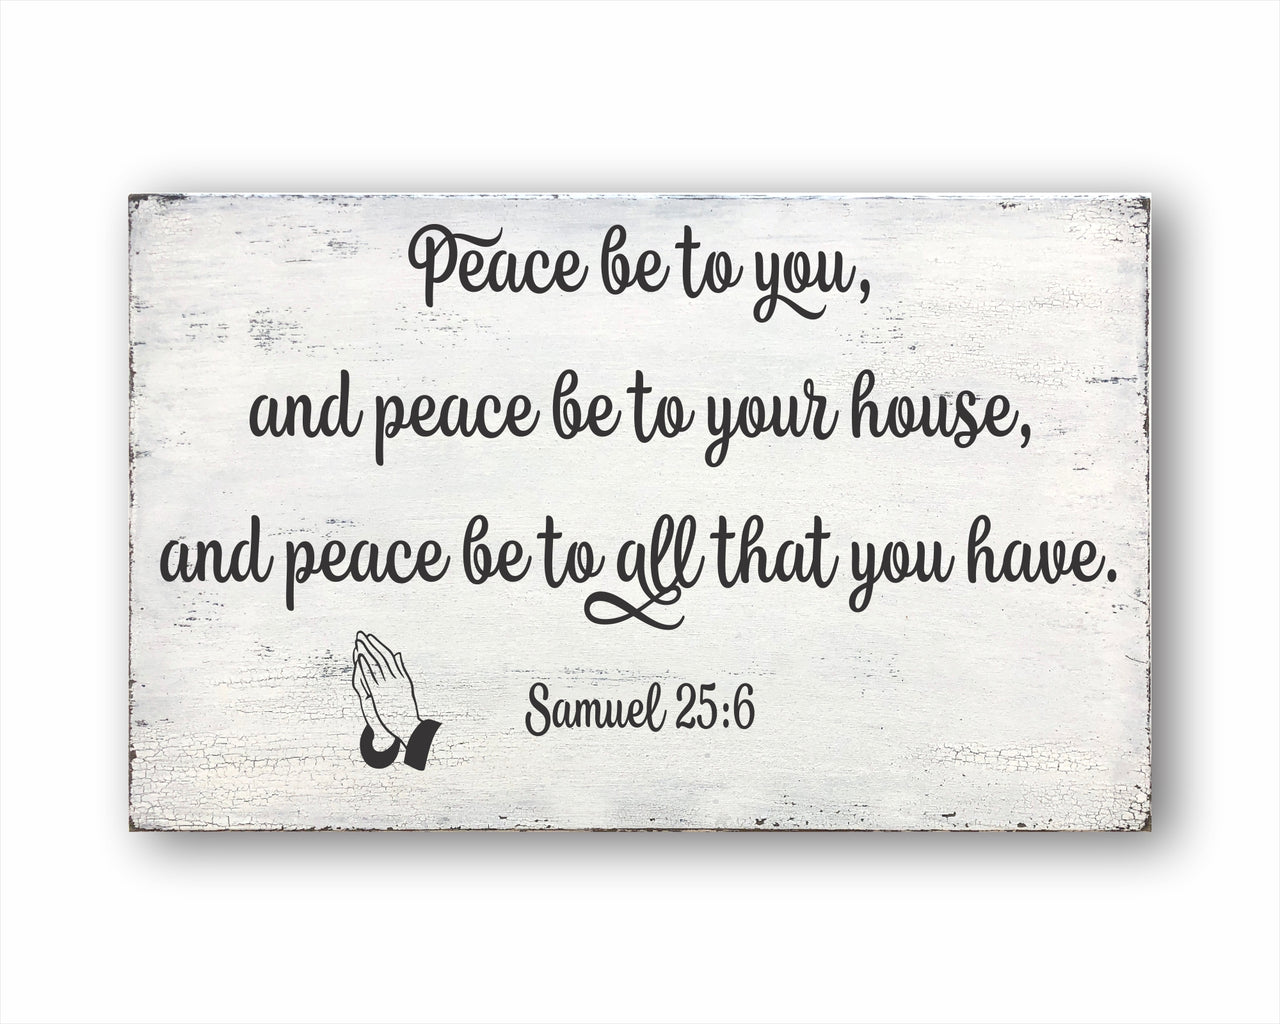 Peace Be To You And Peace Be To Your House And Peace Be To All That You Have Samuel 25:6: Rustic Rectangular Wood Sign